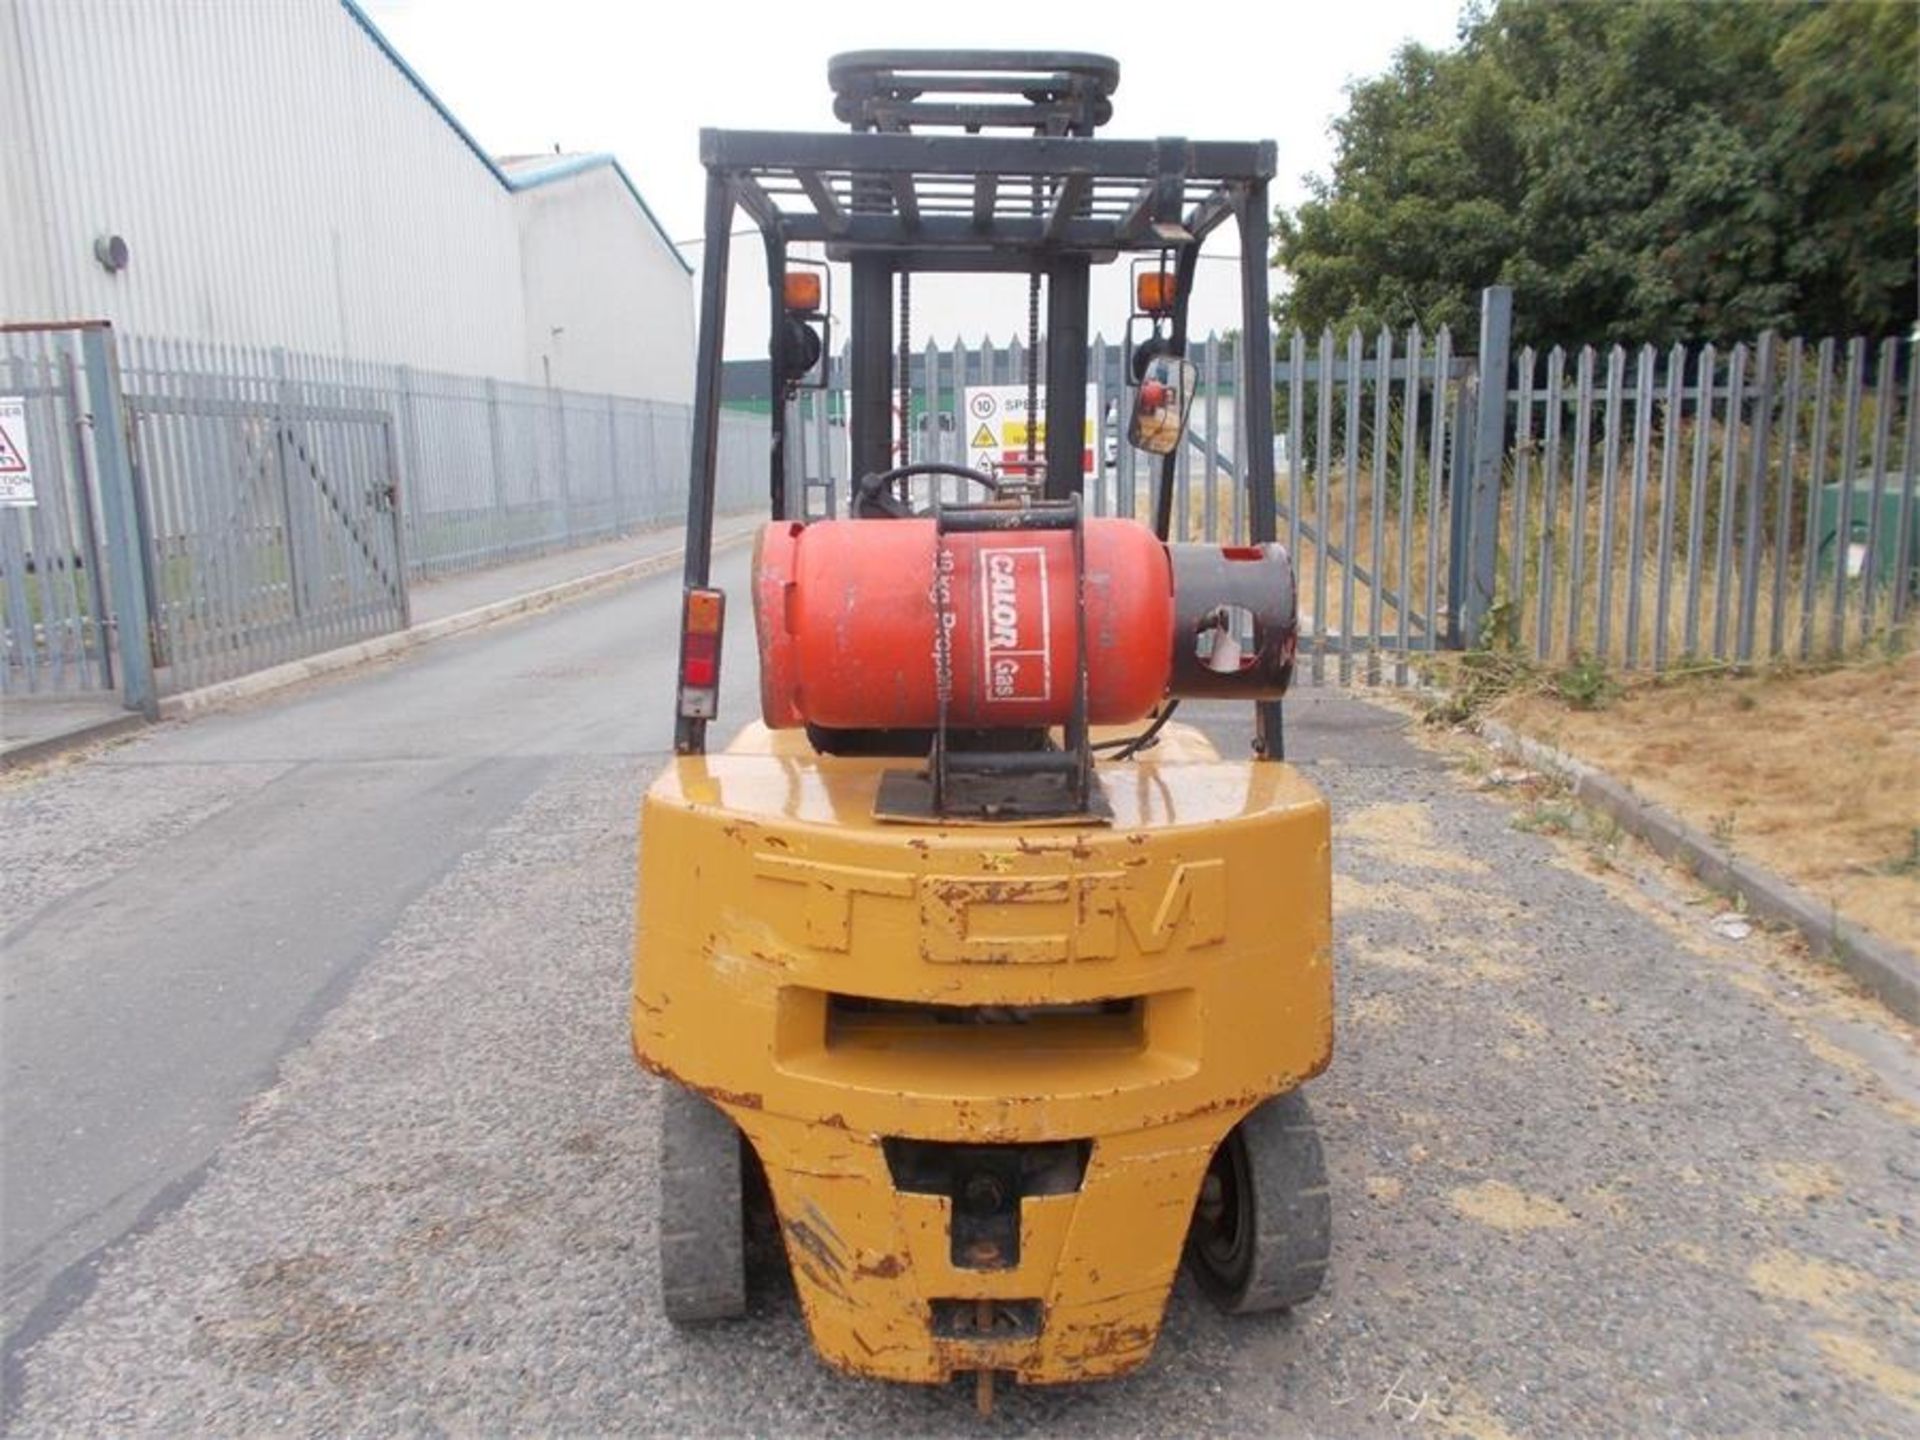 CM FG25 fork lift 2.5 ton Delivery arranged 3.75 metres lift height - Image 7 of 9